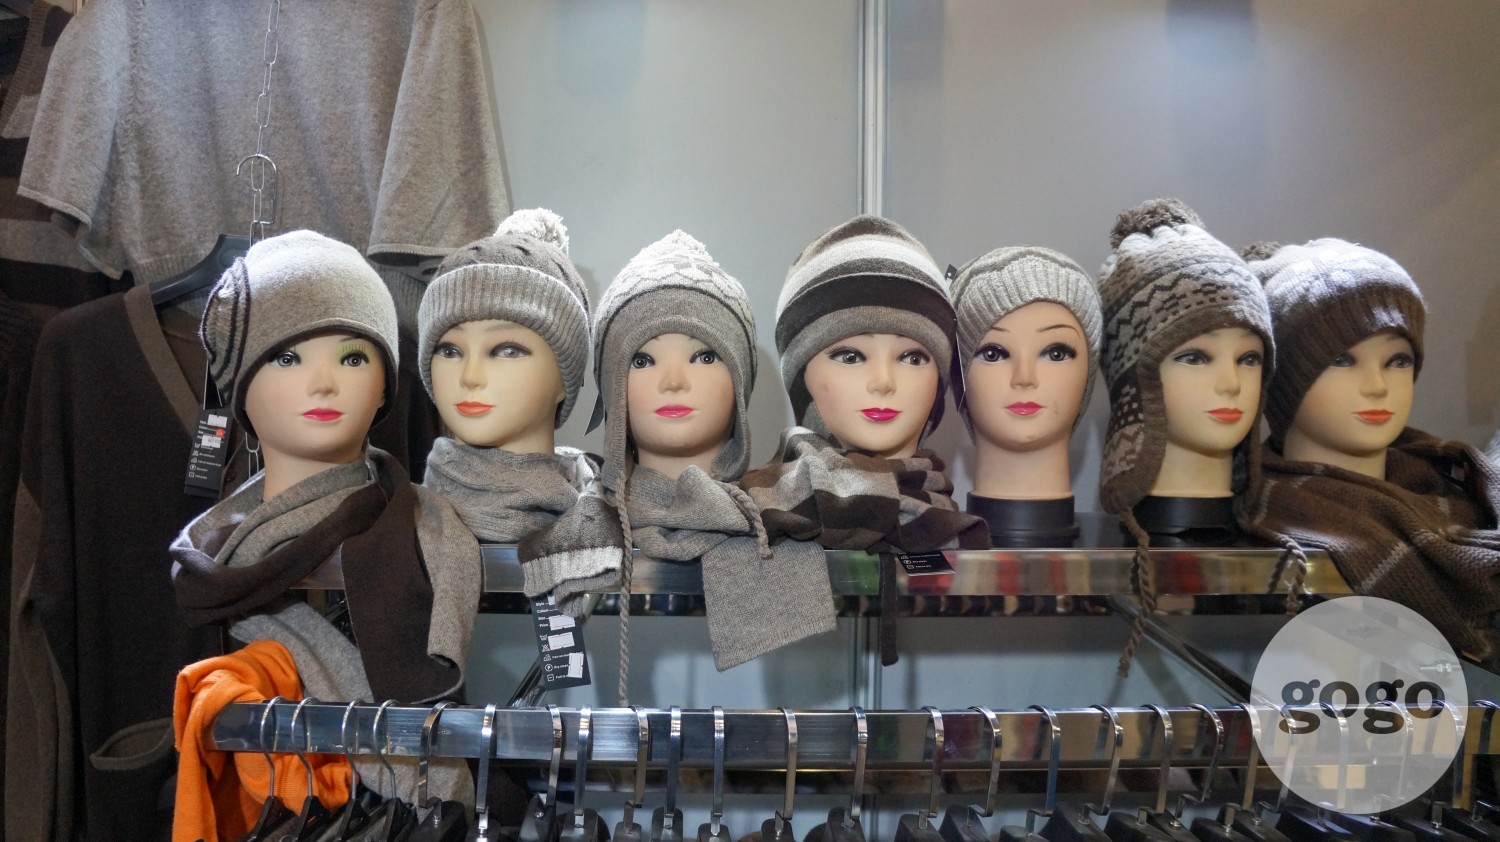 Yak wool, cattle and sheep wool hat and scarf (MNT 16.000-35.000)